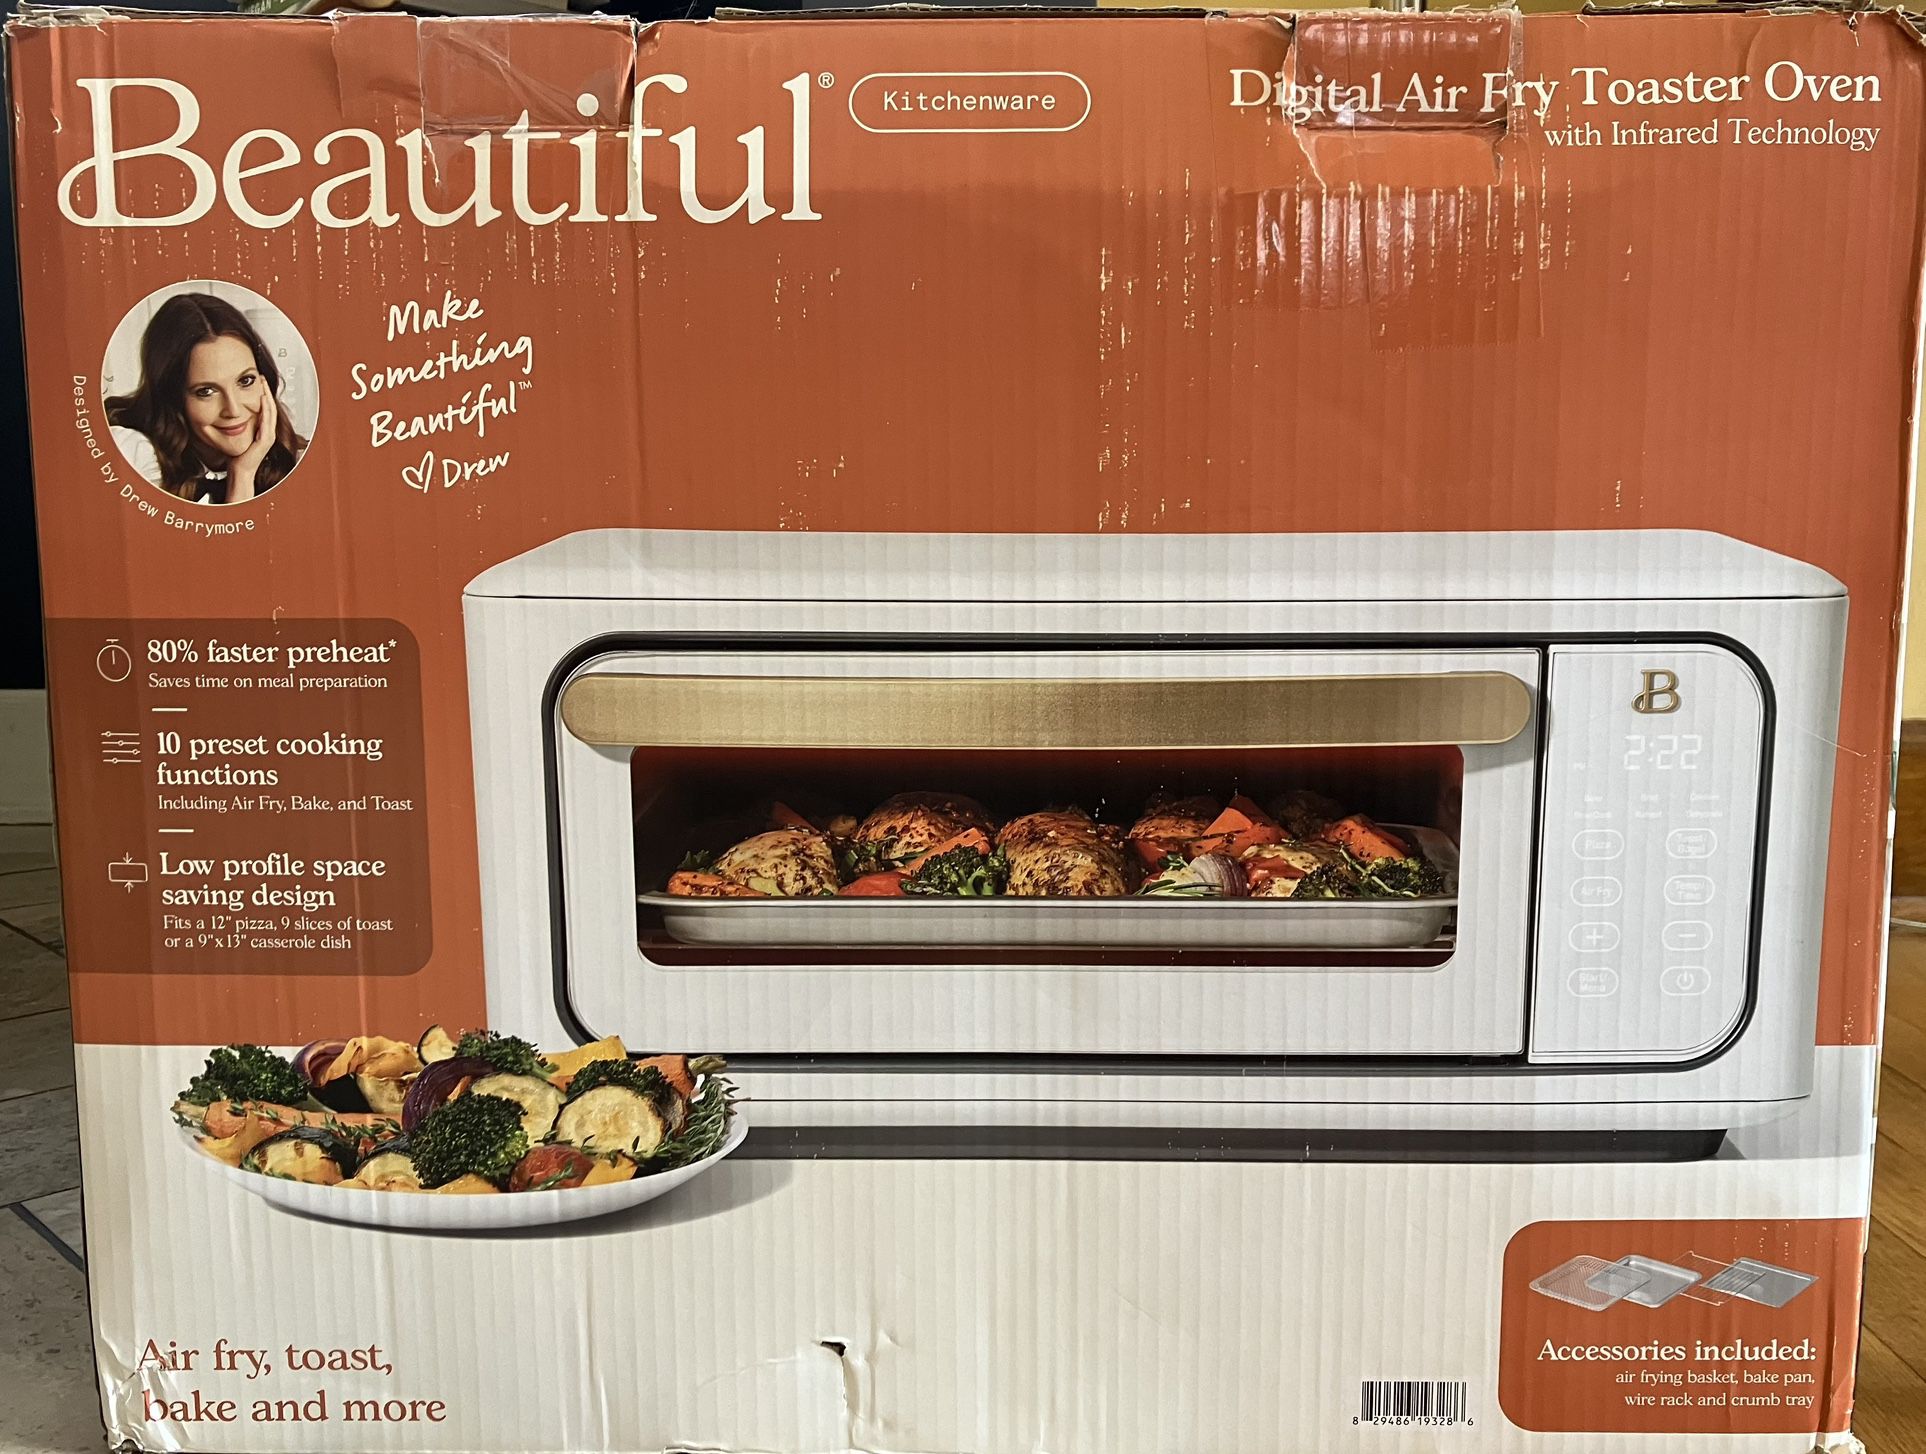 Brand New ReroM Infrared Air Fry Toaster Oven, 9-Slice, 1800 W, White Icing by Drew Barr